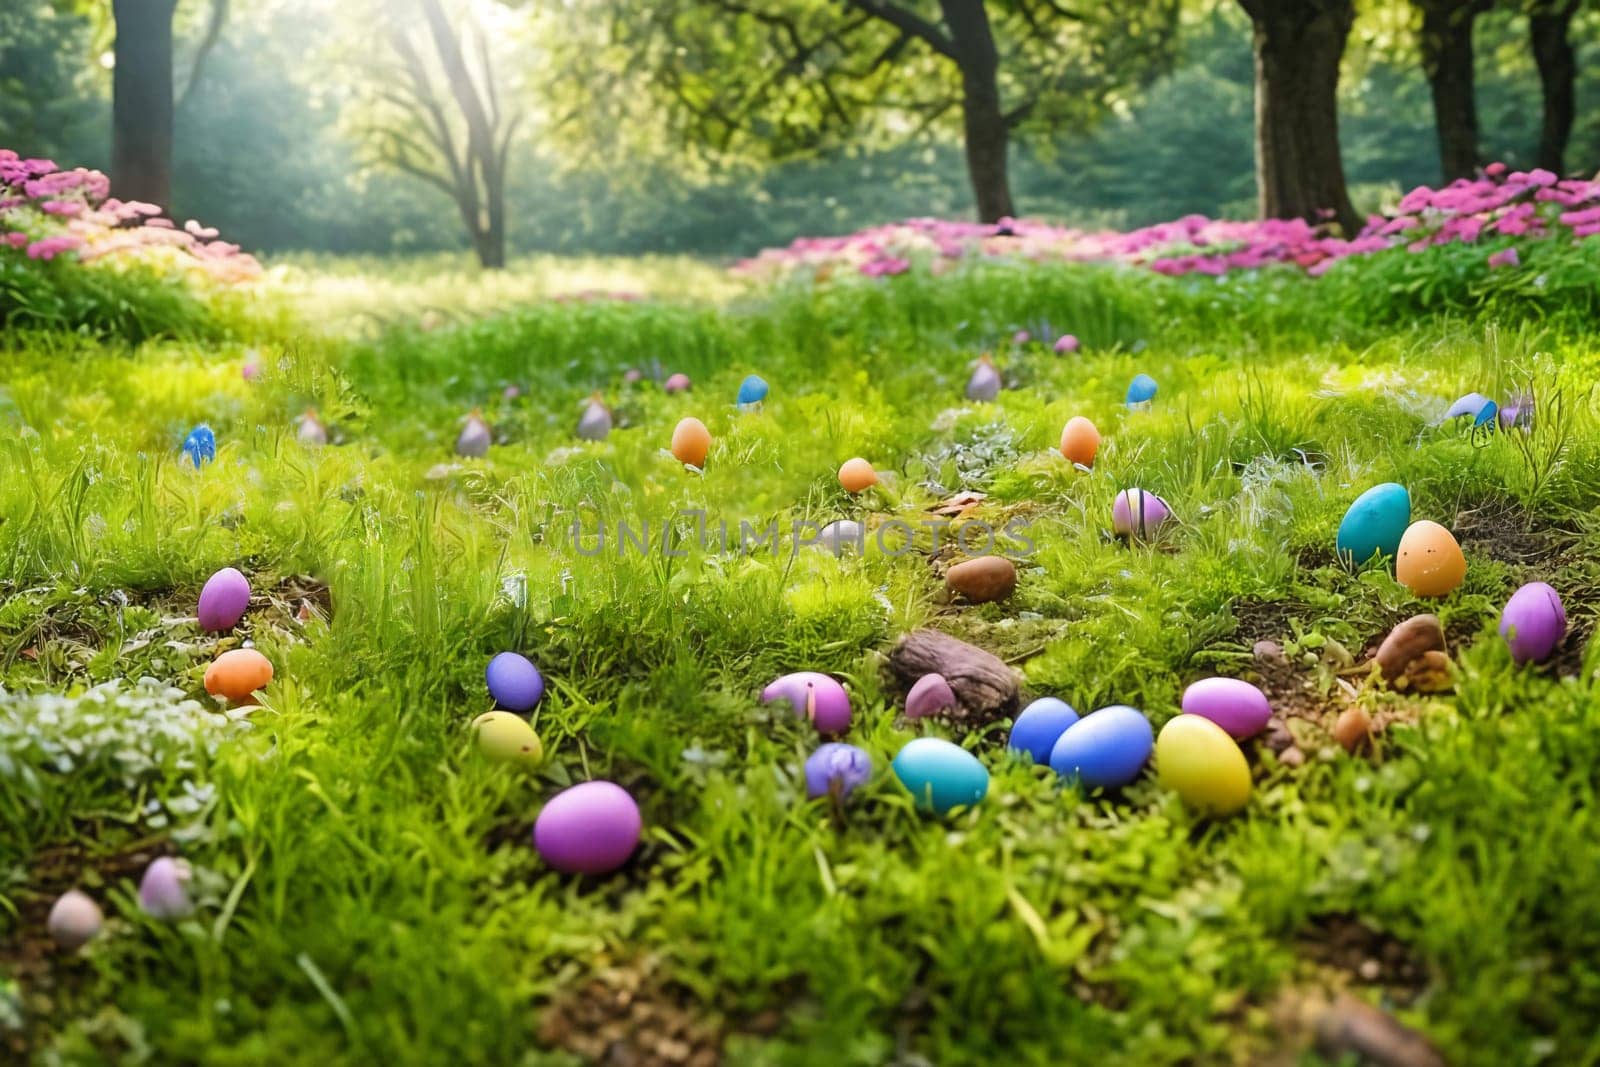 Easter Egg Hunt. A whimsical scene of hidden Easter eggs nestled among lush green grass, blooming flowers, and scattered foliage, creating a sense of excitement and discovery for the viewer.